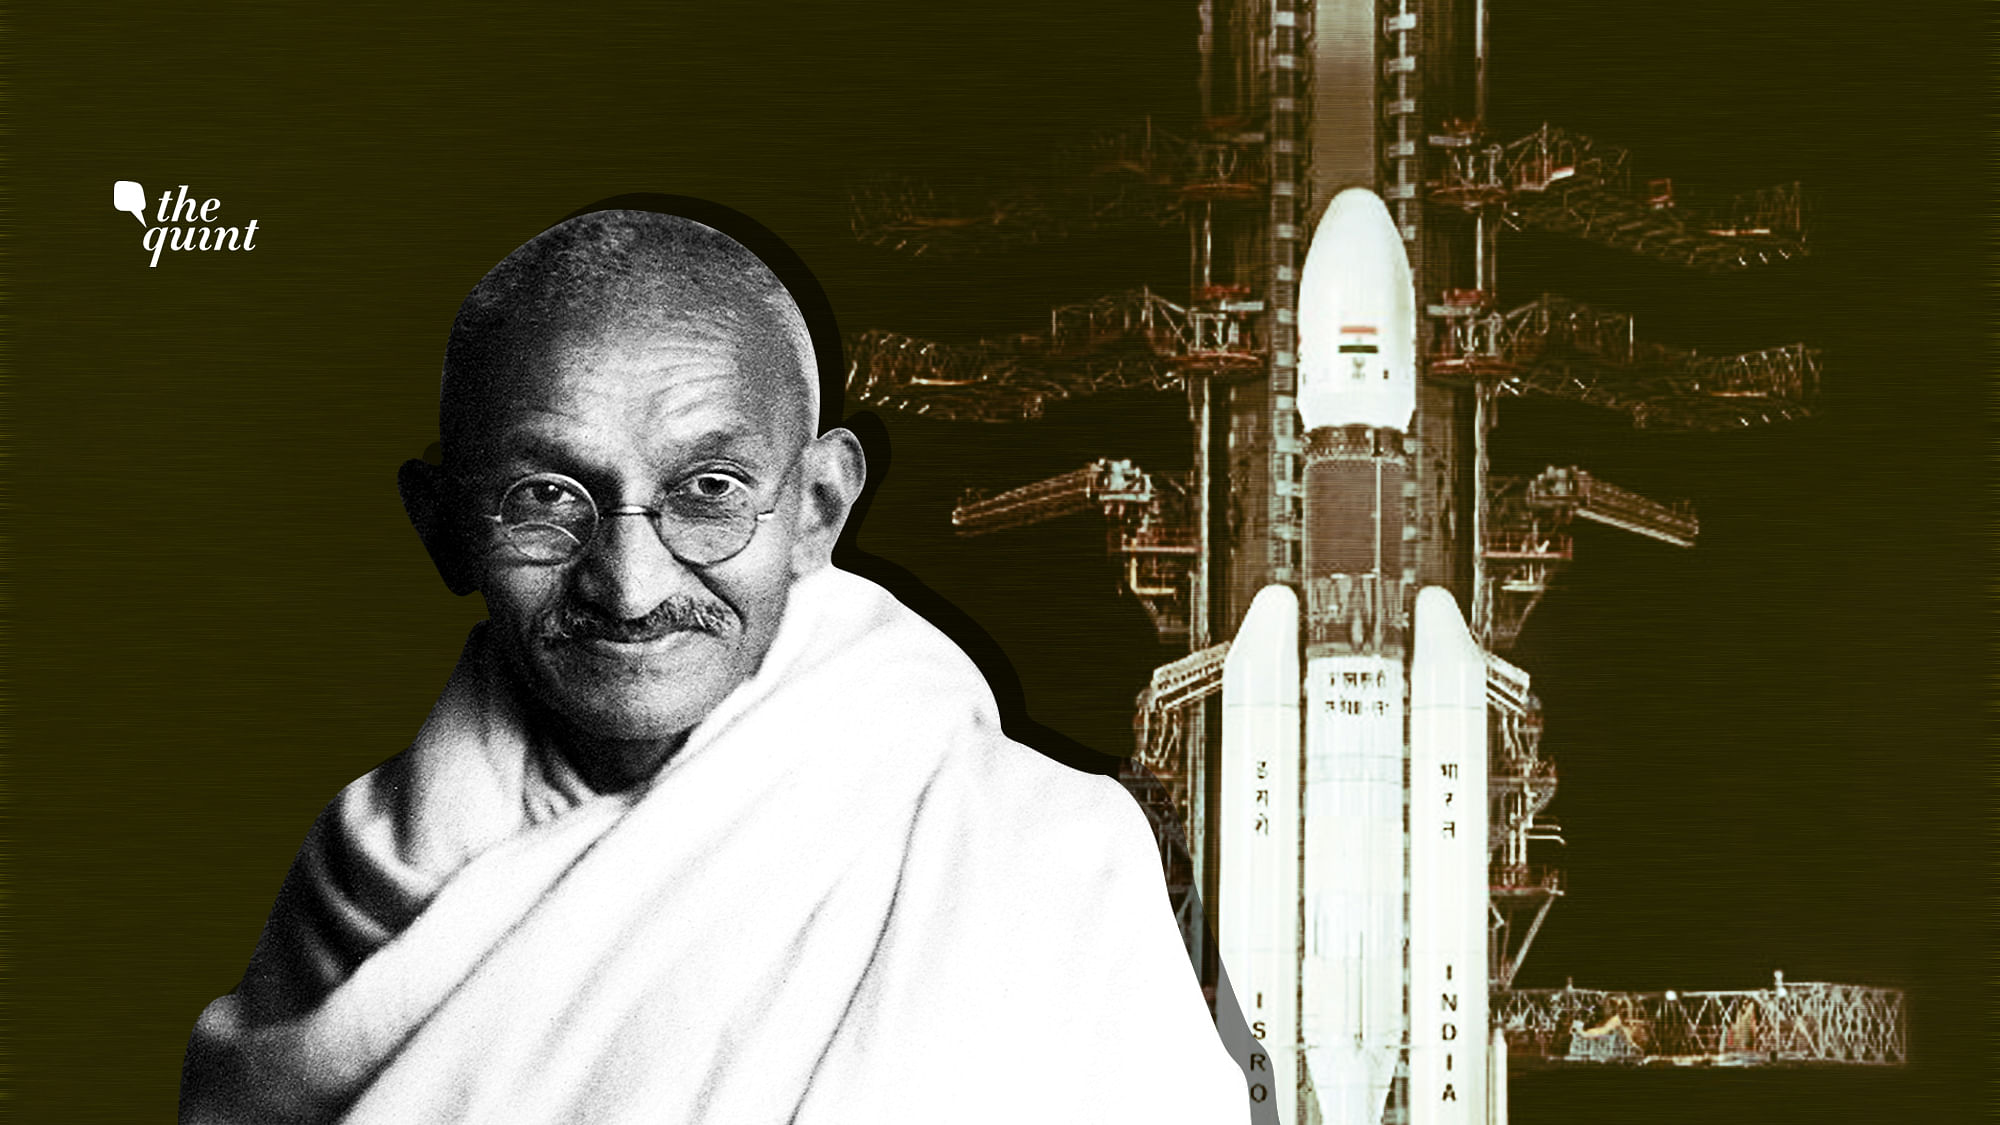 Image of Gandhi juxtaposed against image released by ISRO before Chandrayaan-2’s launch, used for representational purposes.